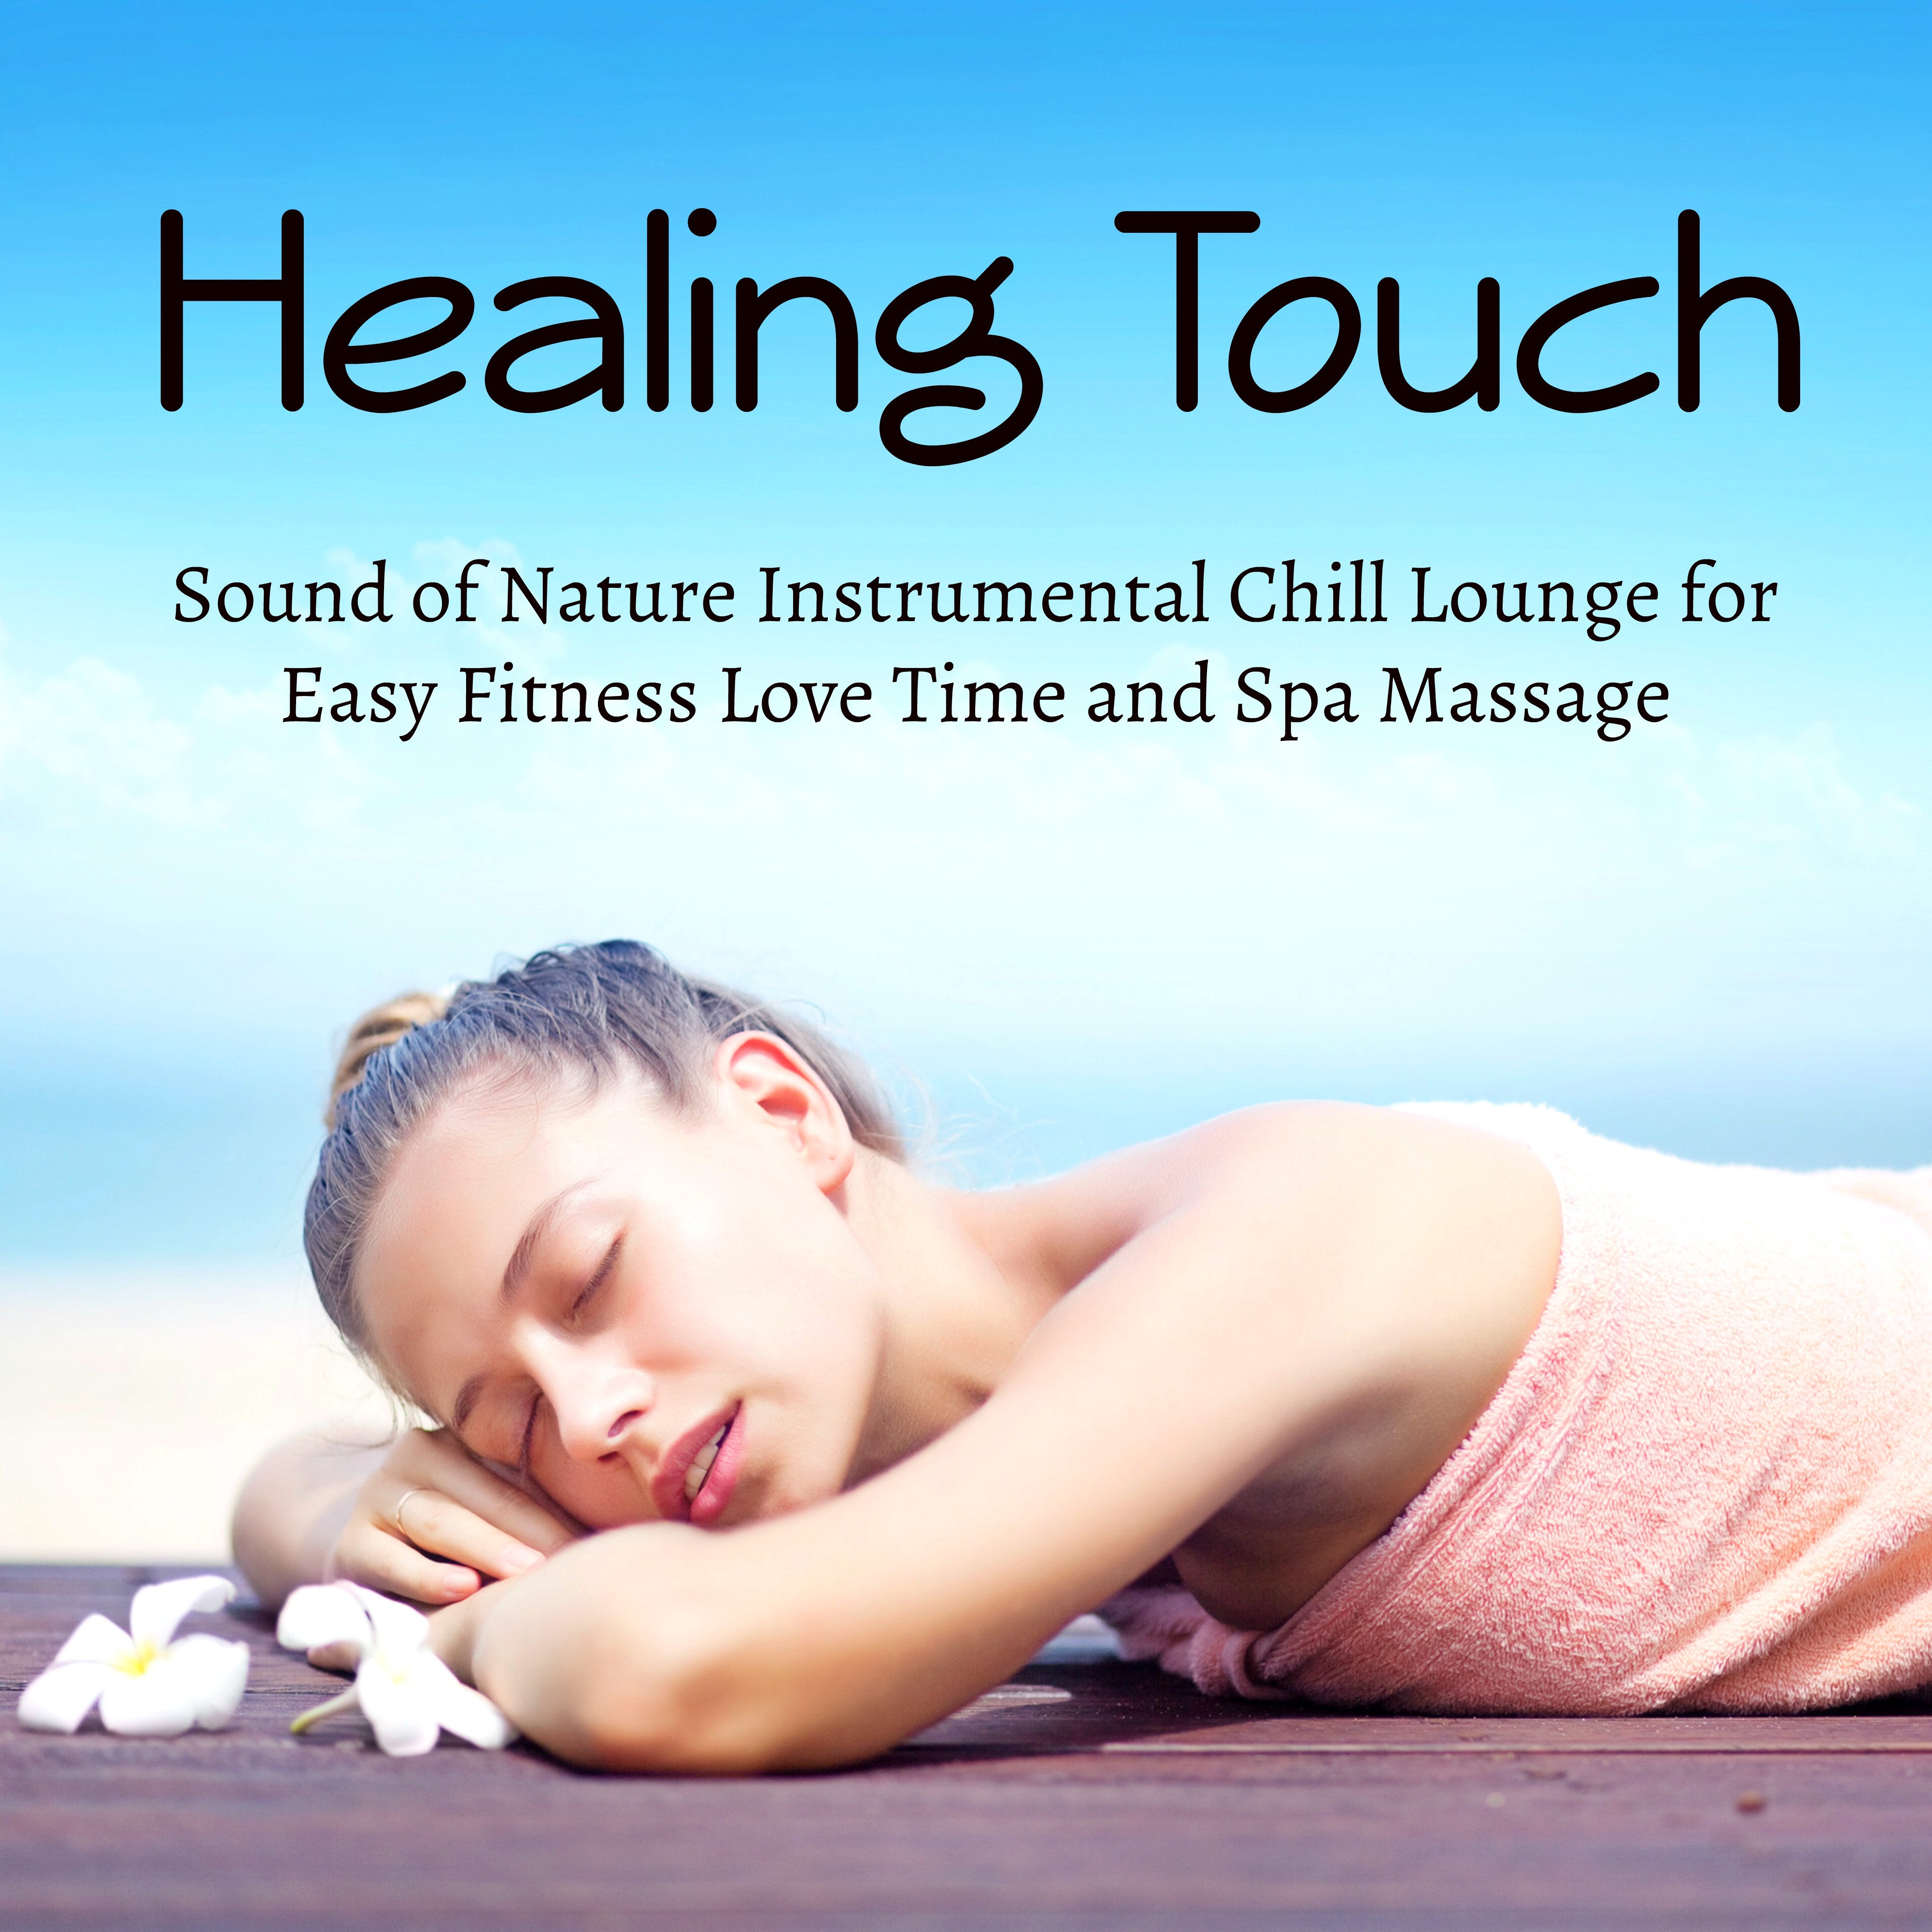 Healing Touch - Sound of Nature Instrumental Chill Lounge for Easy Fitness Love Time and Spa Massage